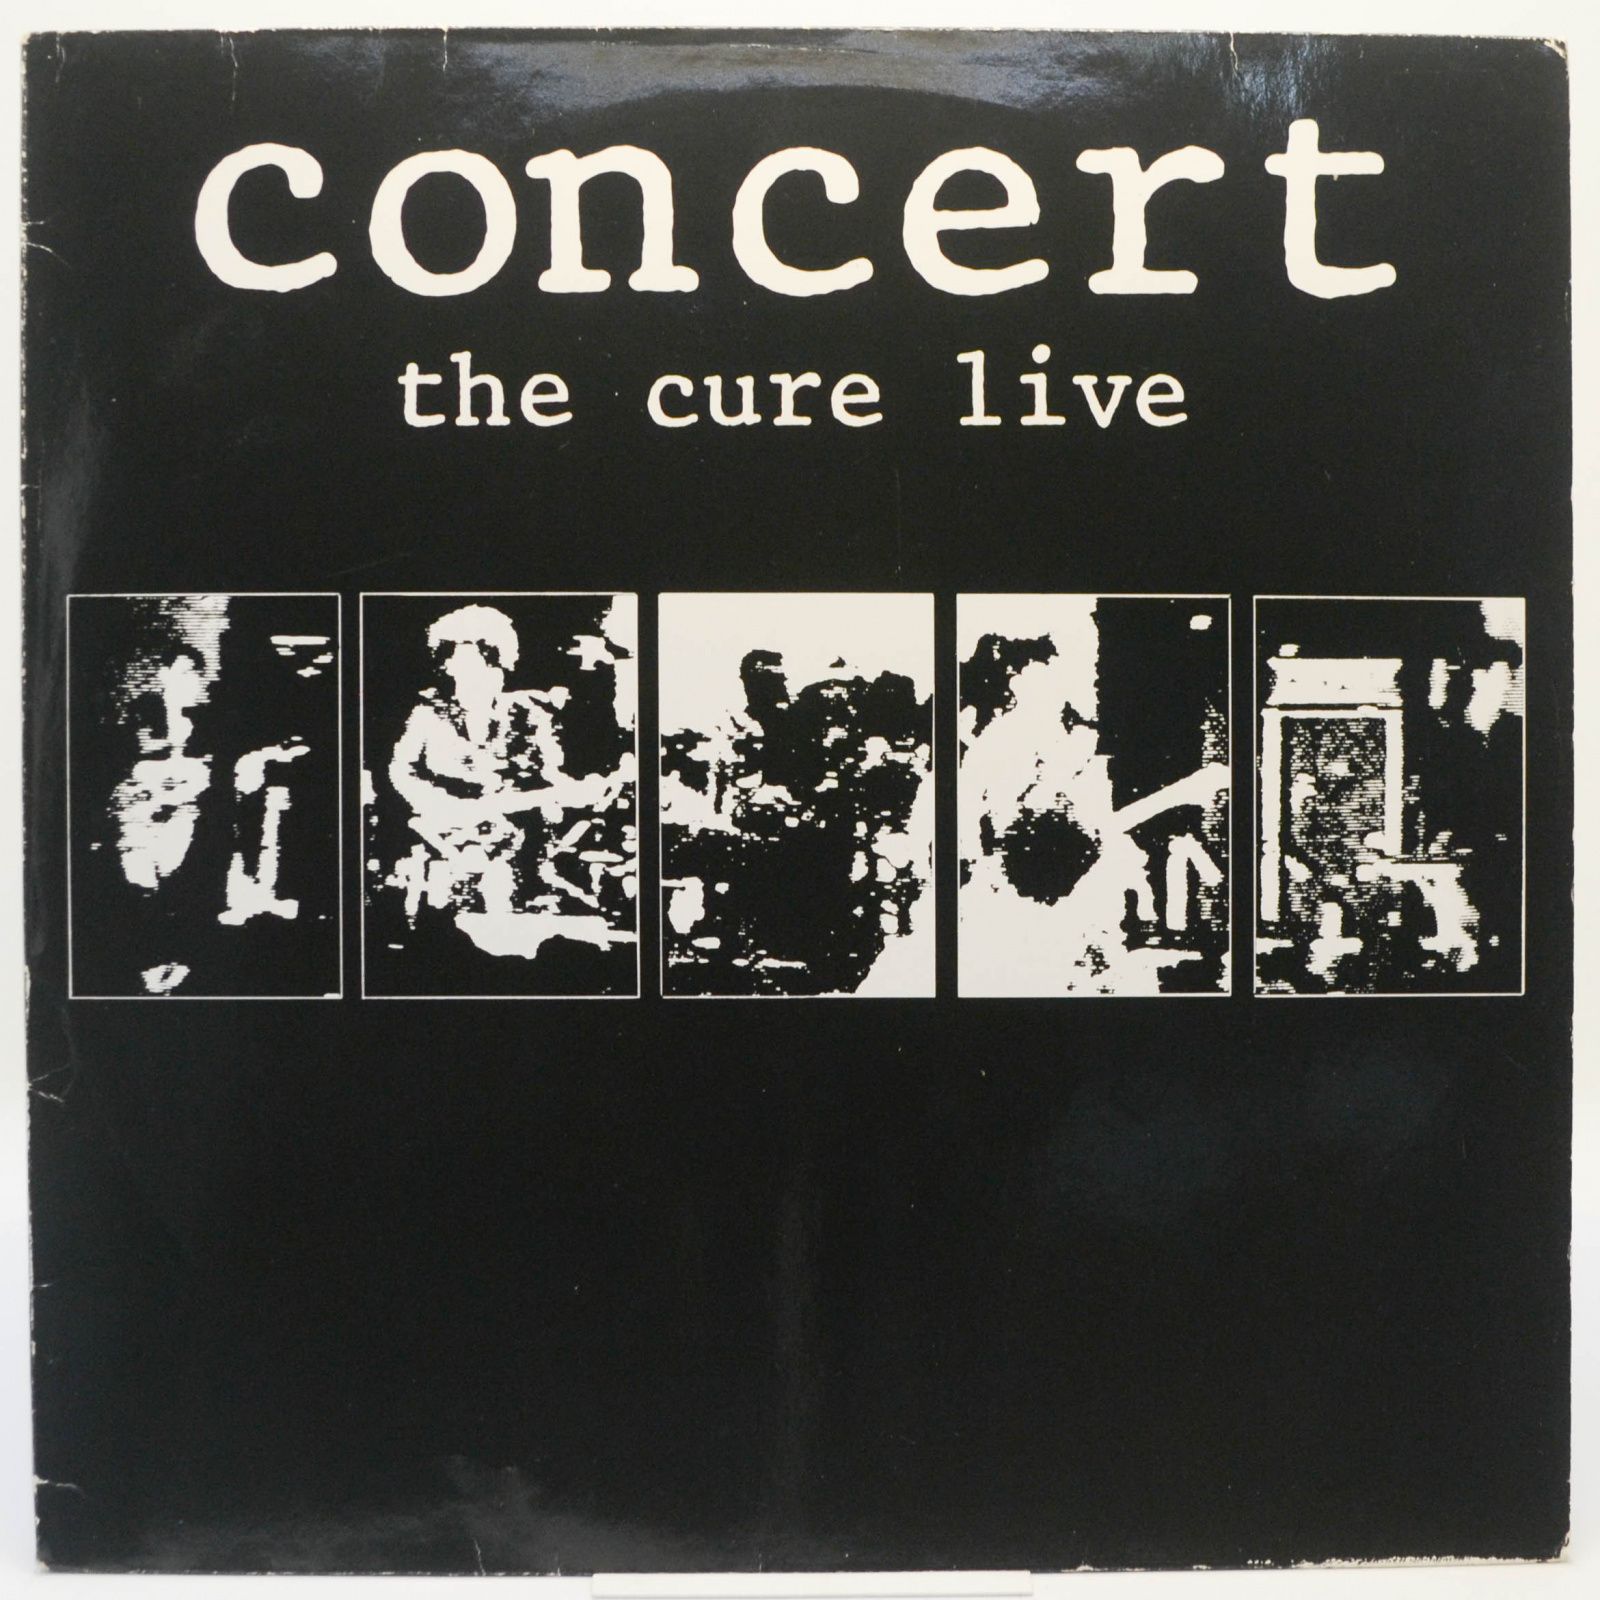 Concert - The Cure Live, 1984